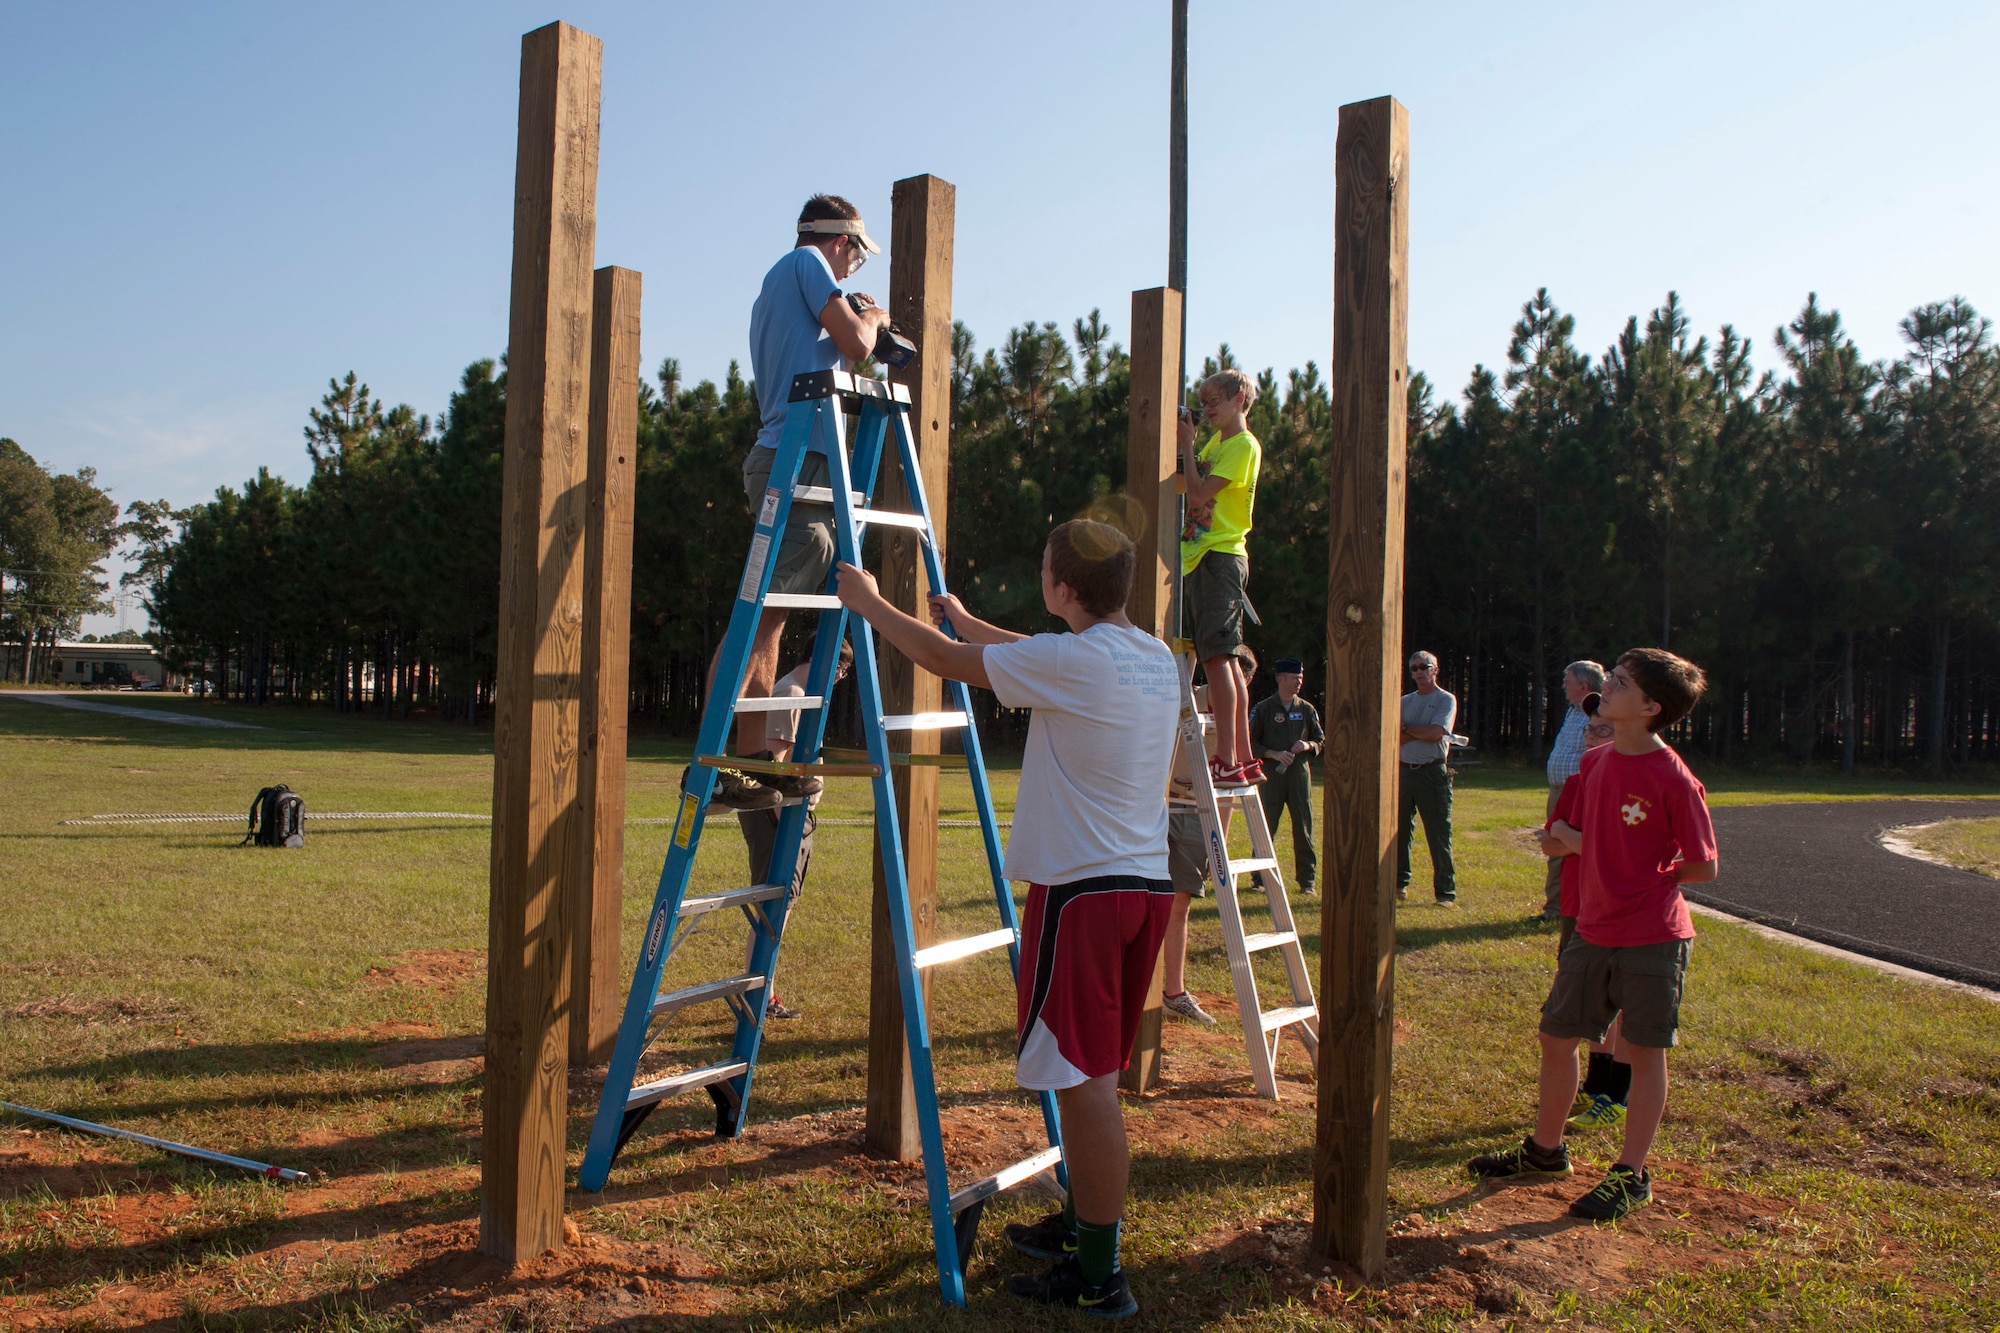 Boy Scouts with Troop 95 from Irmo, S.C., build pull-up bars at McEntire Joint National Guard Base, S.C., as part of their Eagle Scout project with help of the 169th Civil Engineer Squadron, Oct. 5, 2013.  The project is a leadership task and final step before earning Eagle Scout. (U.S. Air National Guard photo by Staff Sgt. Jorge Intriago/Released) 